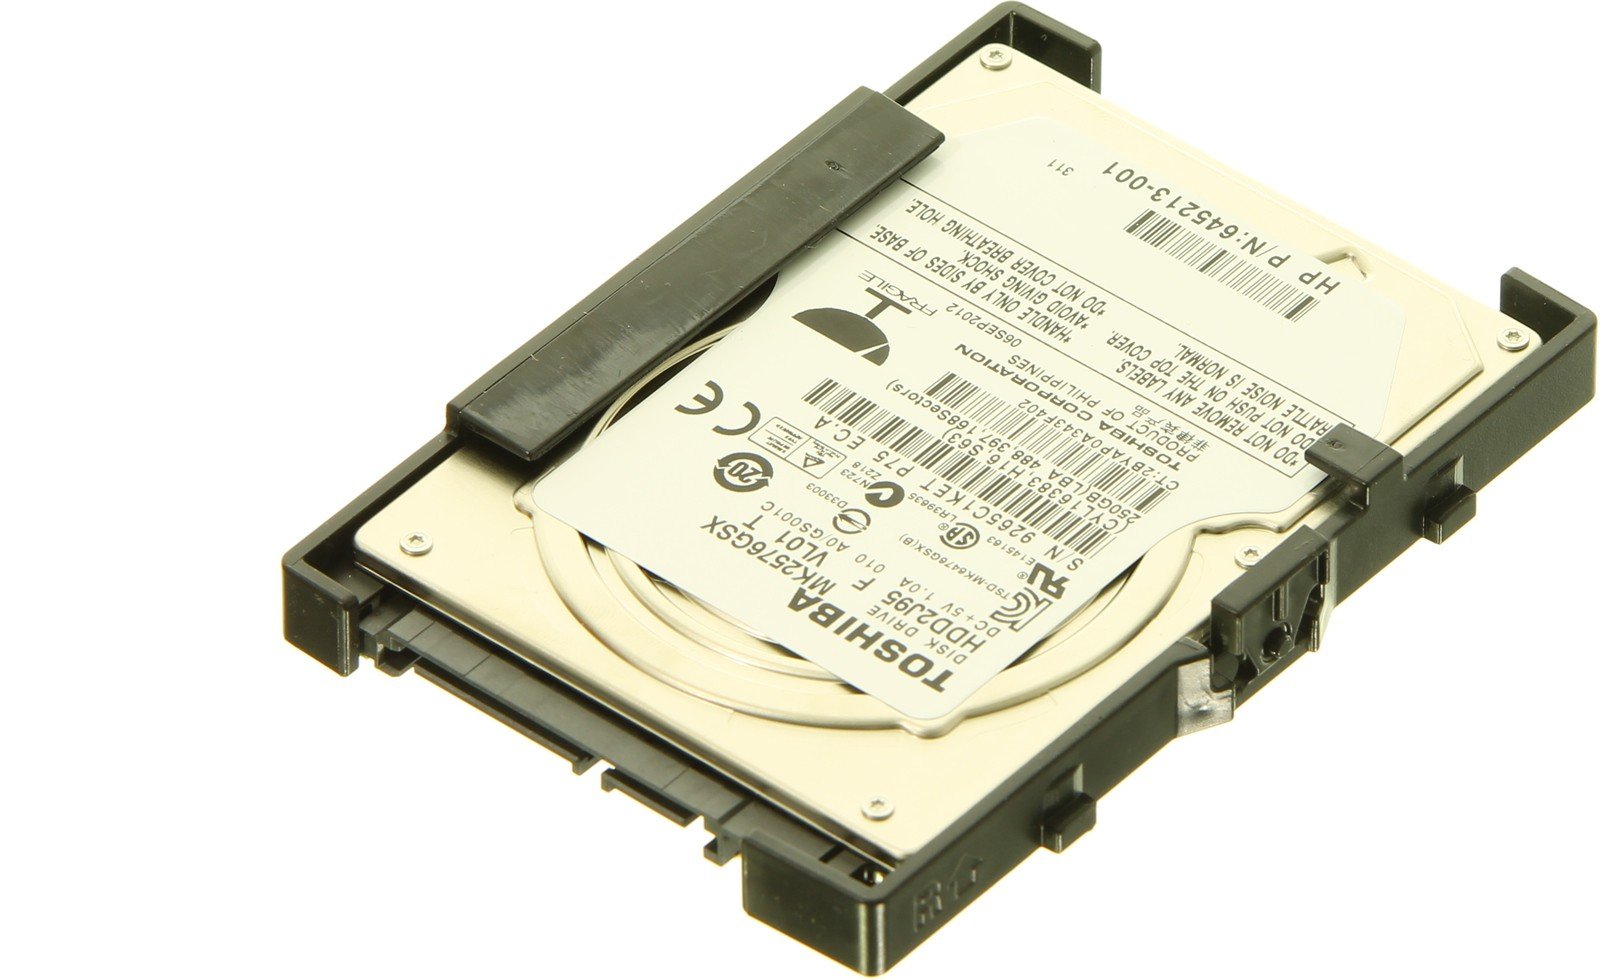 80GB SATA Hard Drive 2.5 Hard Drive for Hewlett Packard Color MFP models.Q3938-67985New packaged product